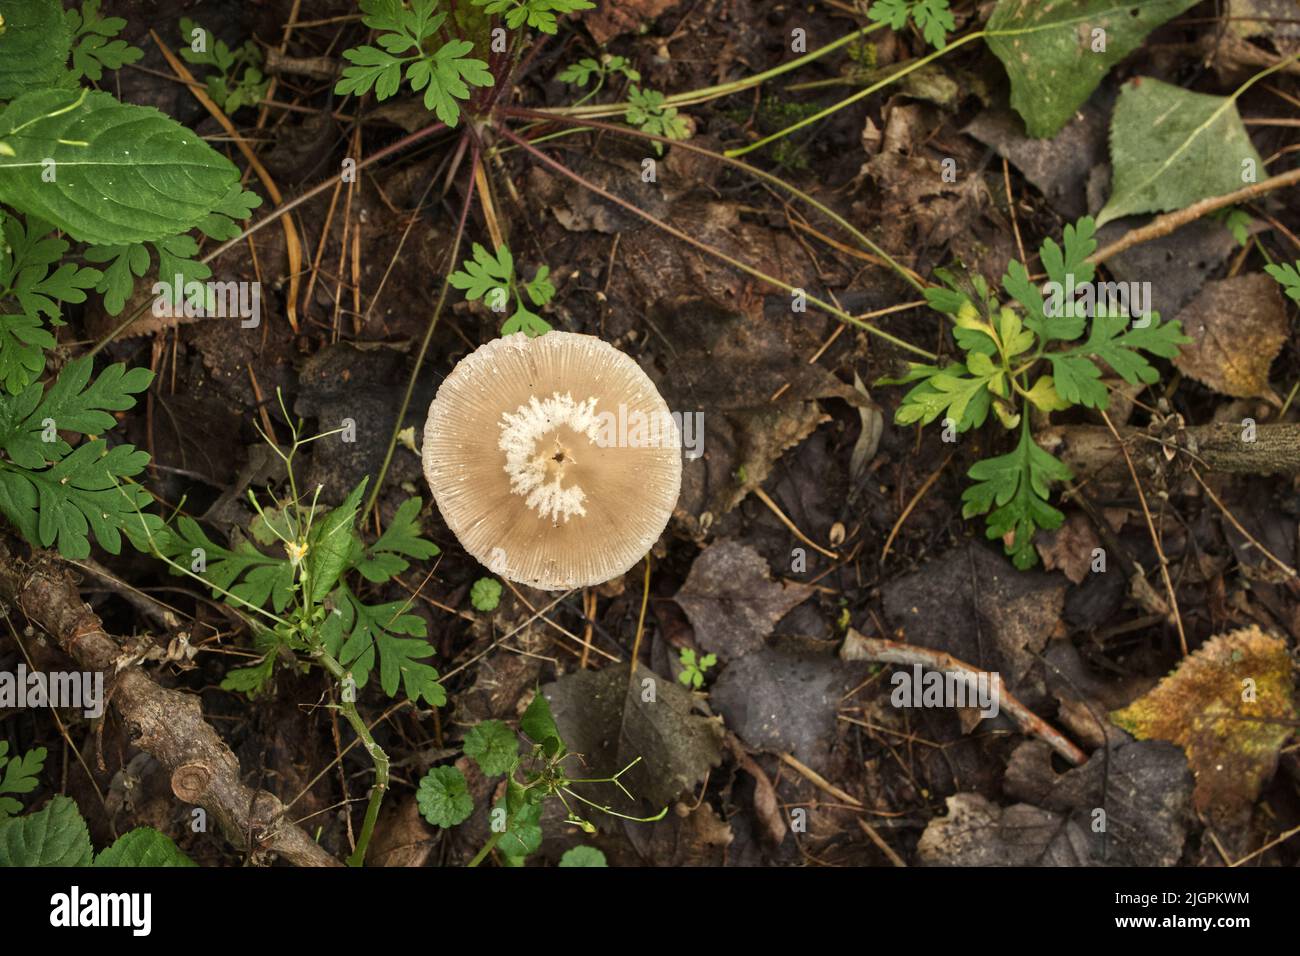 Poisonous mushrooms in the autumn forest Stock Photo